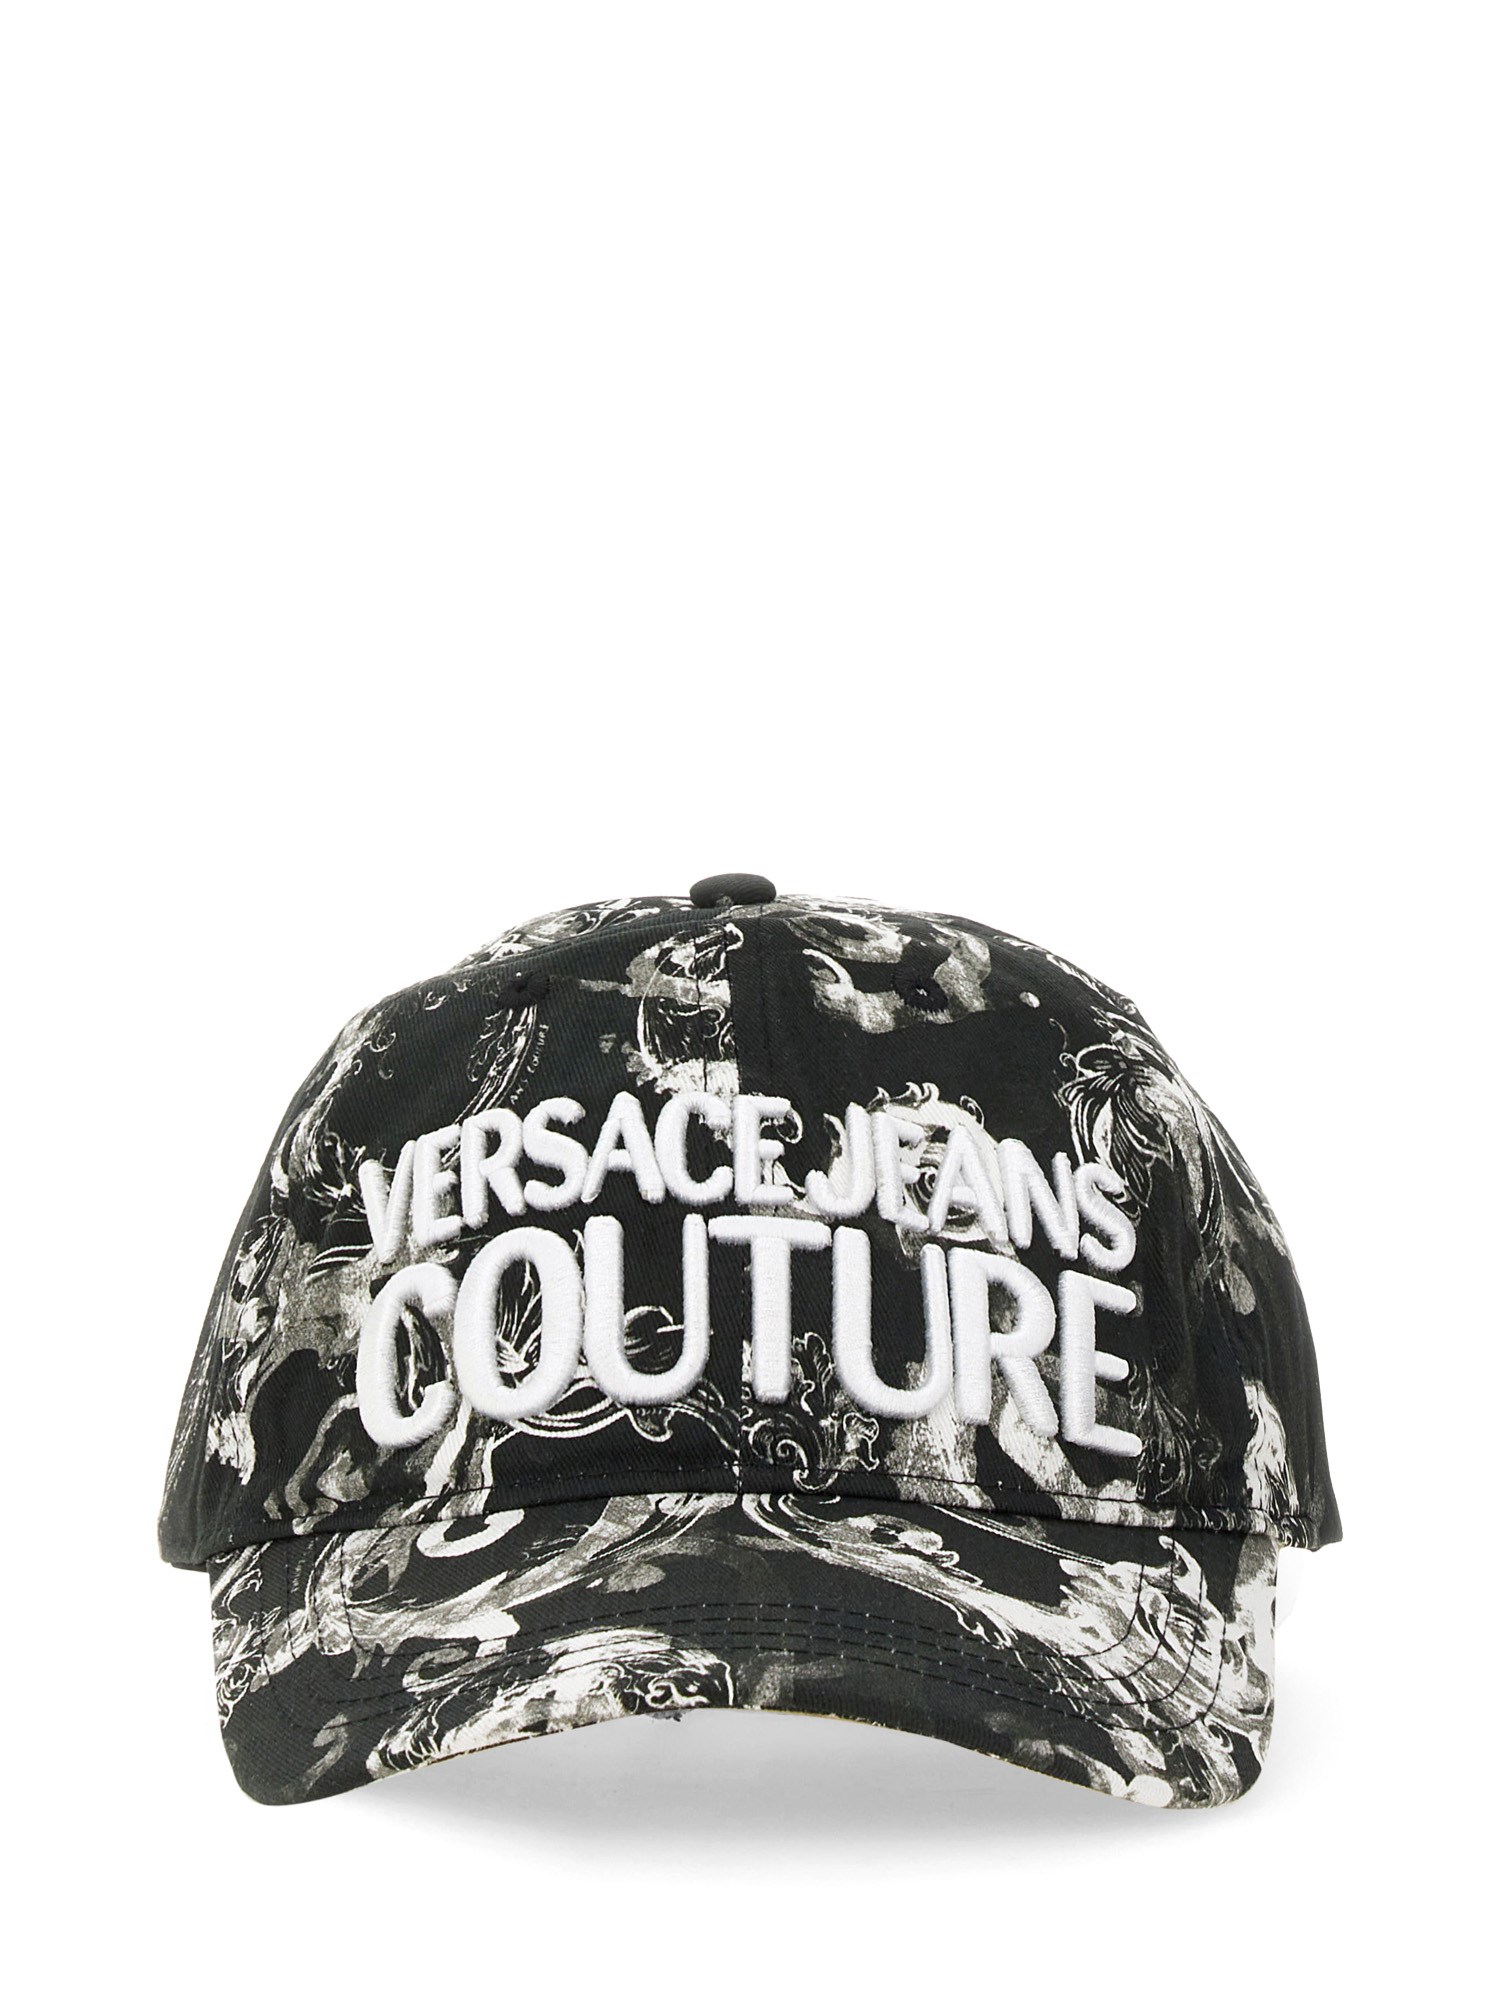 versace jeans couture baseball hat with logo